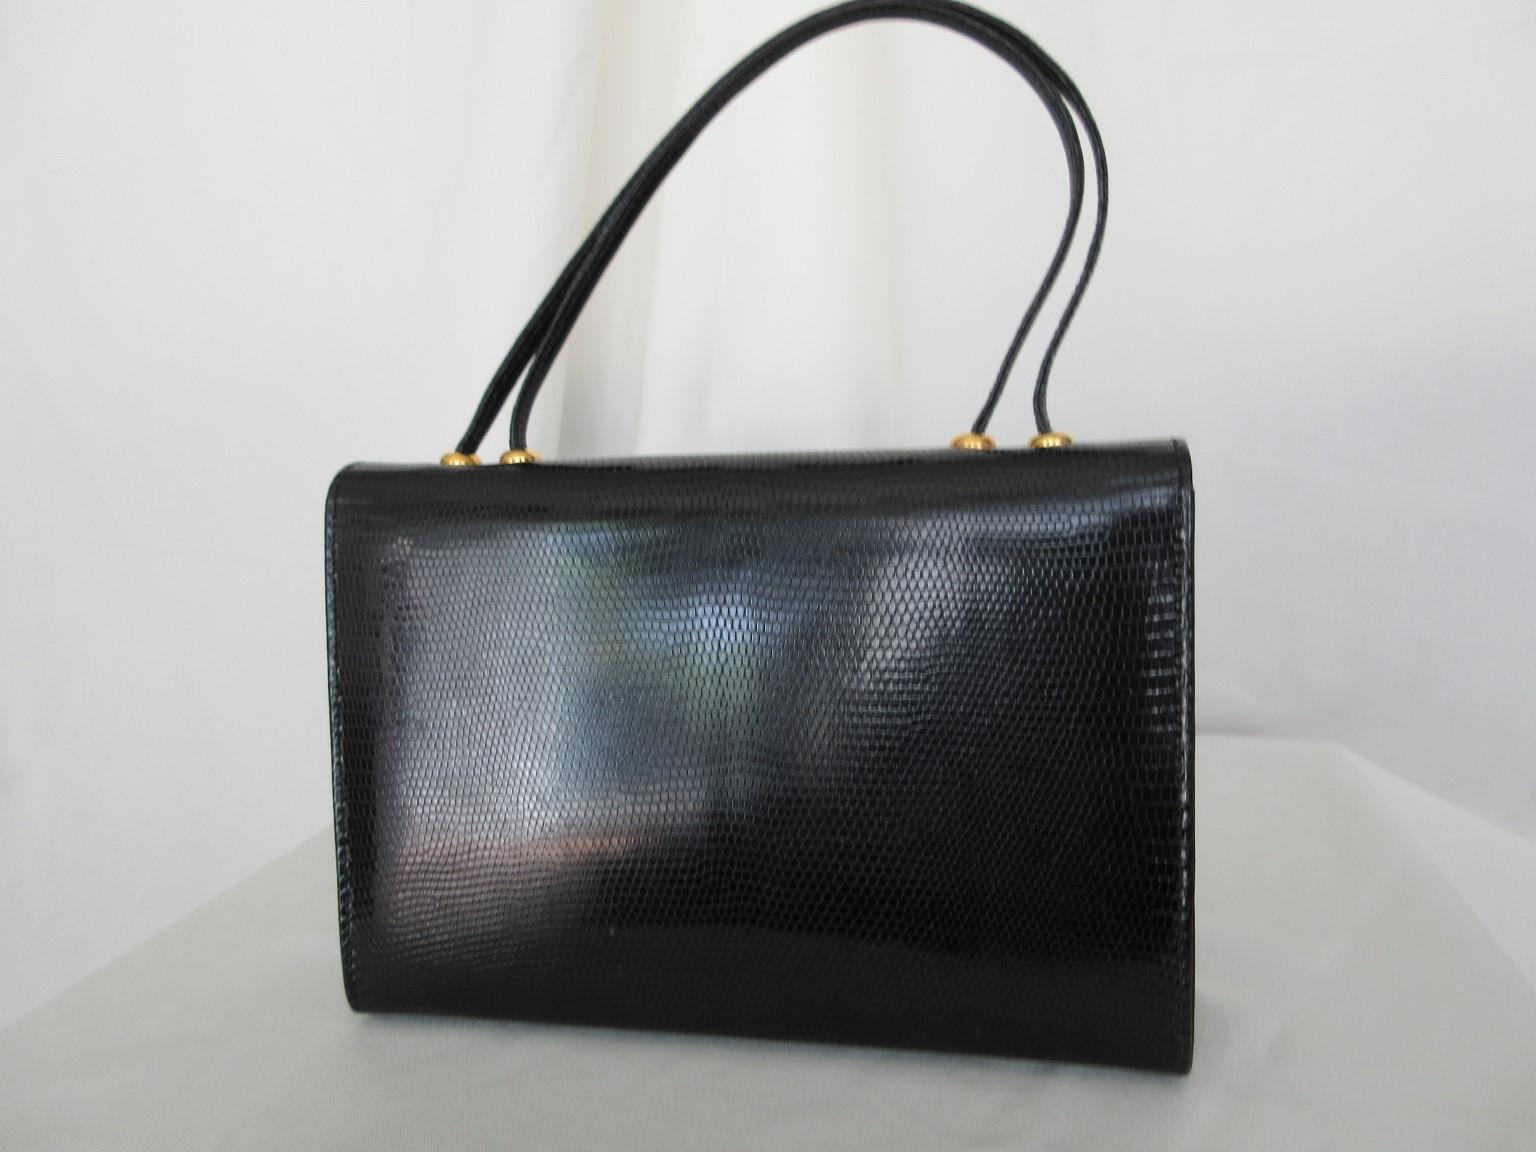 FENDI Roma vintage lizard skin leather bag
 -Collectors item-
period 1960's/1970's

We offer more exclusive items, view our frontstore

Details:
Gold hardware
Black leather lined interior with 1 zipper pocket and 1 open pocket
Lock is rotating to